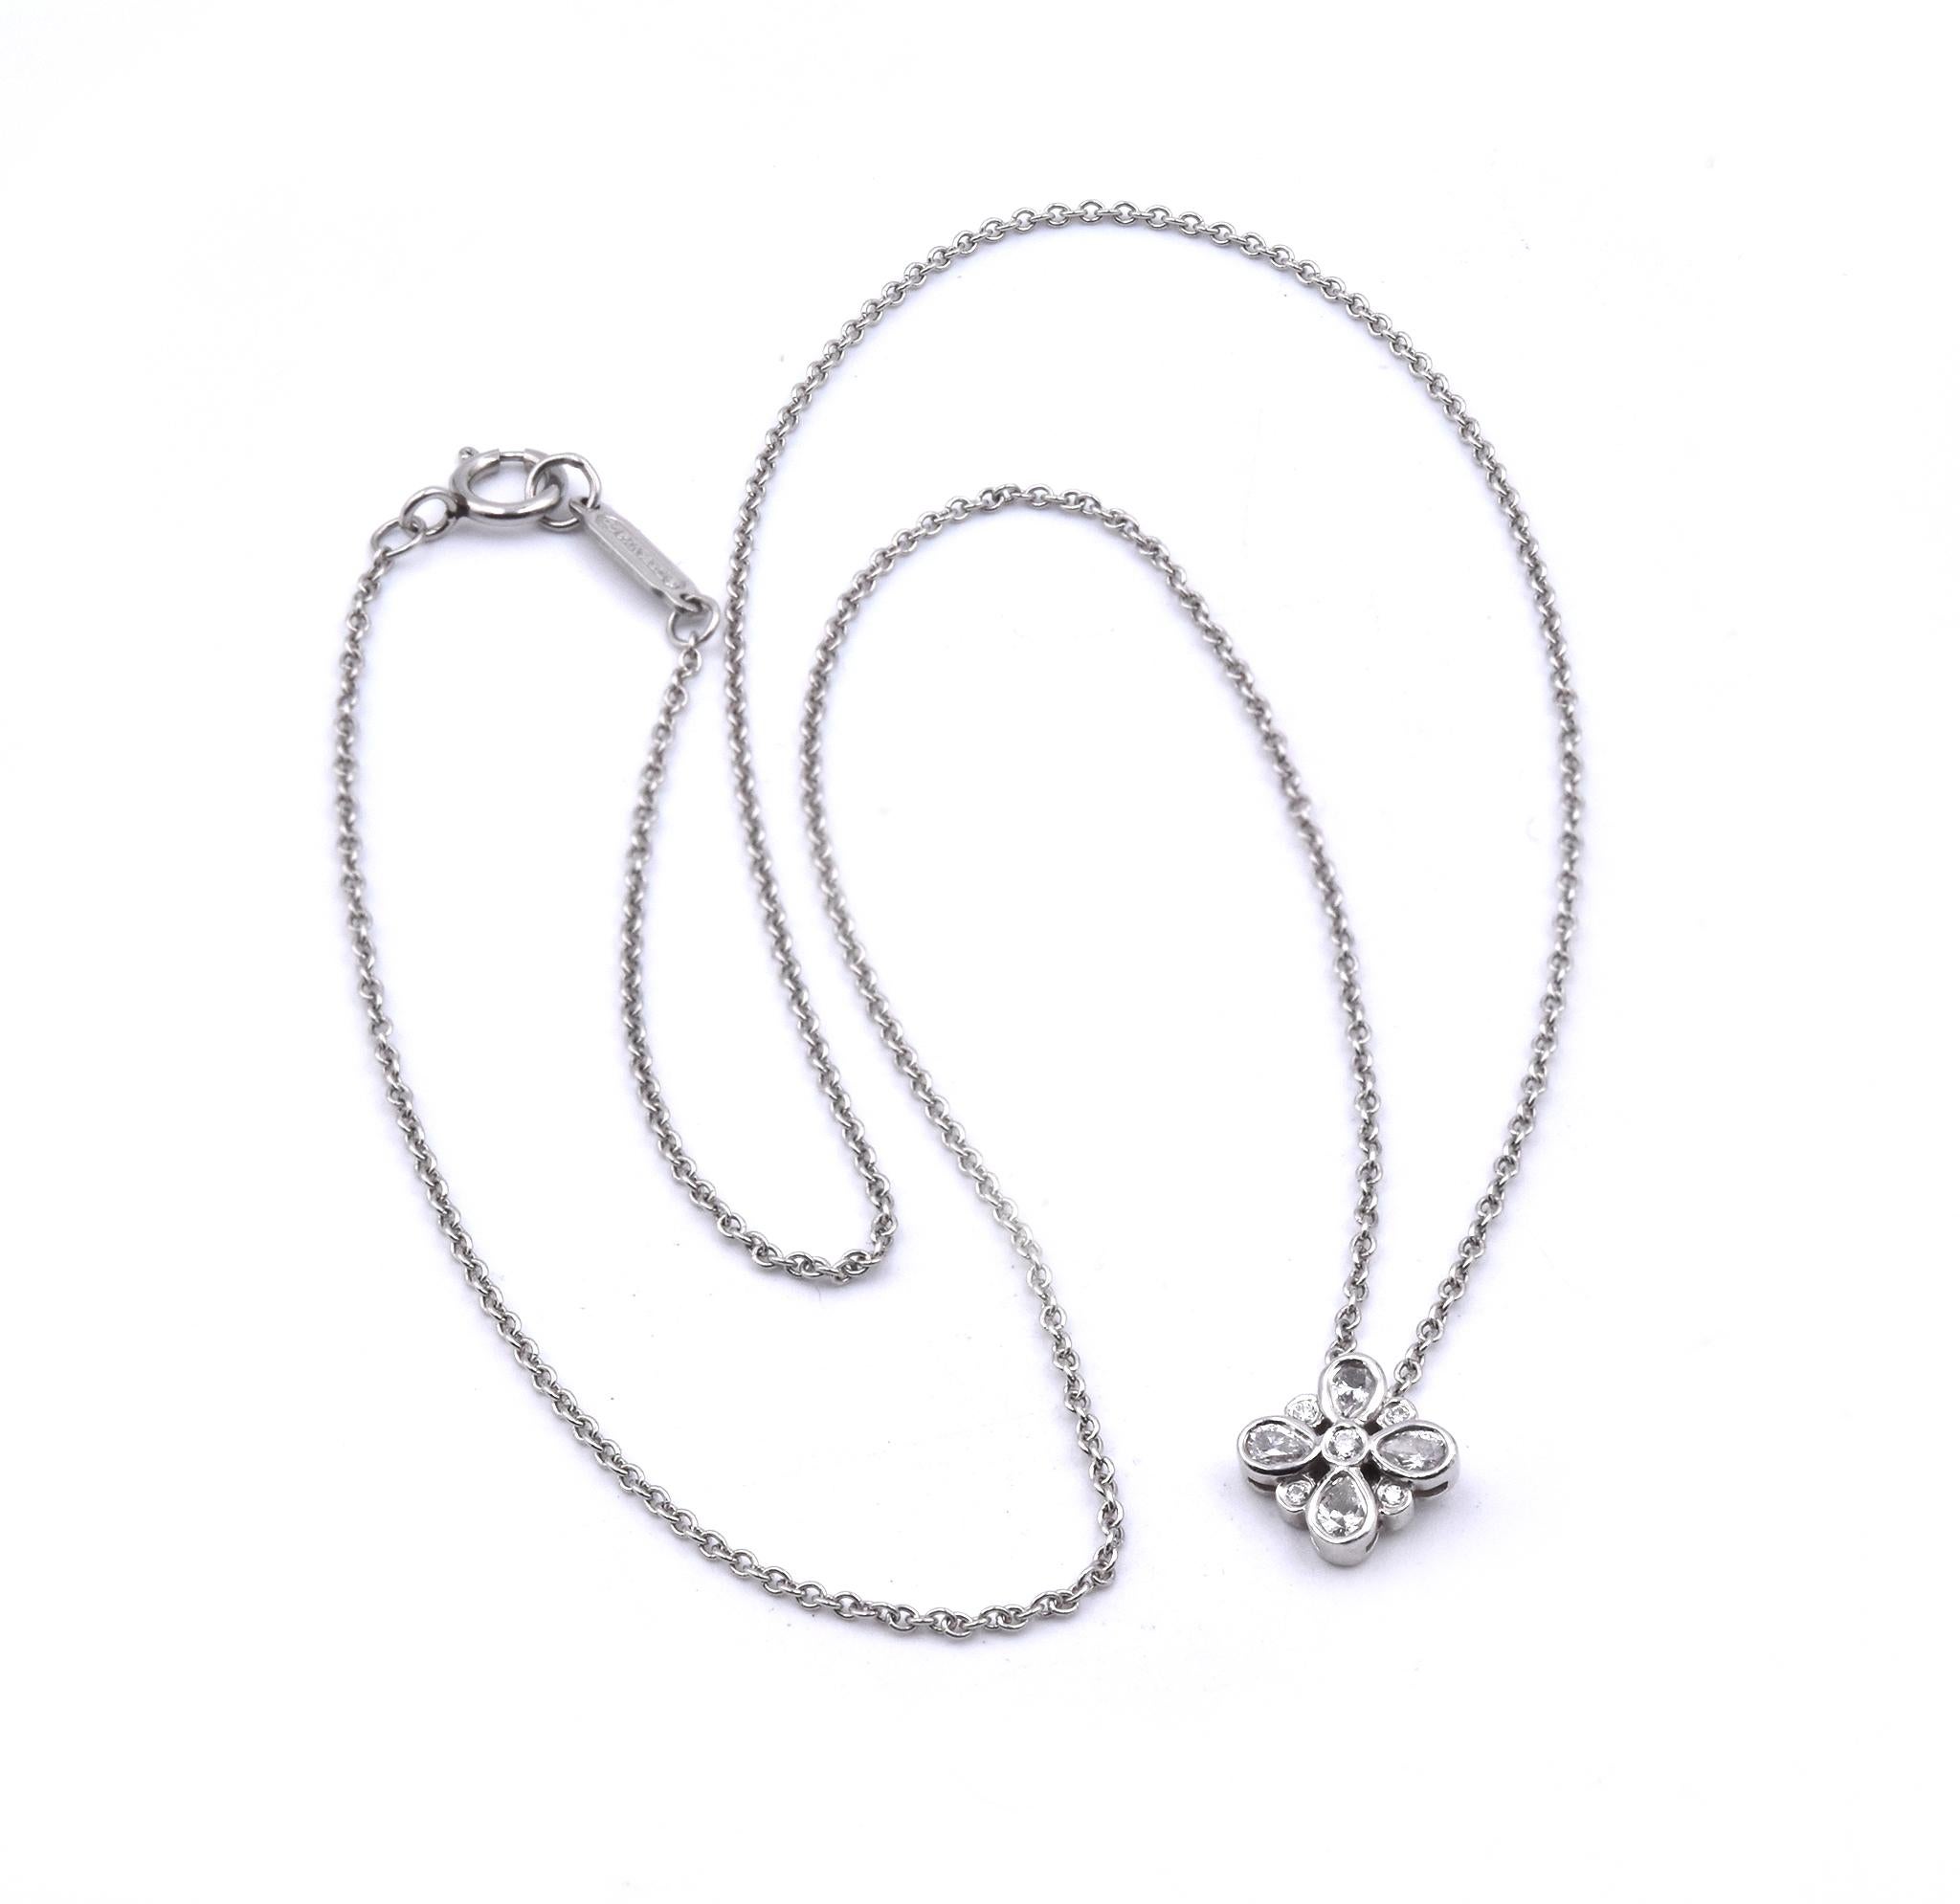 Designer: Tiffany & Co. 
Material: Platinum
Diamonds: 4 pear cut = .16cttw
Color: G
Clarity: VS2
Diamonds: 6 round cut = .06cttw
Color: G
Clarity: VS2
Measurement: necklace measures 16-inches
Weight: 2.8 grams